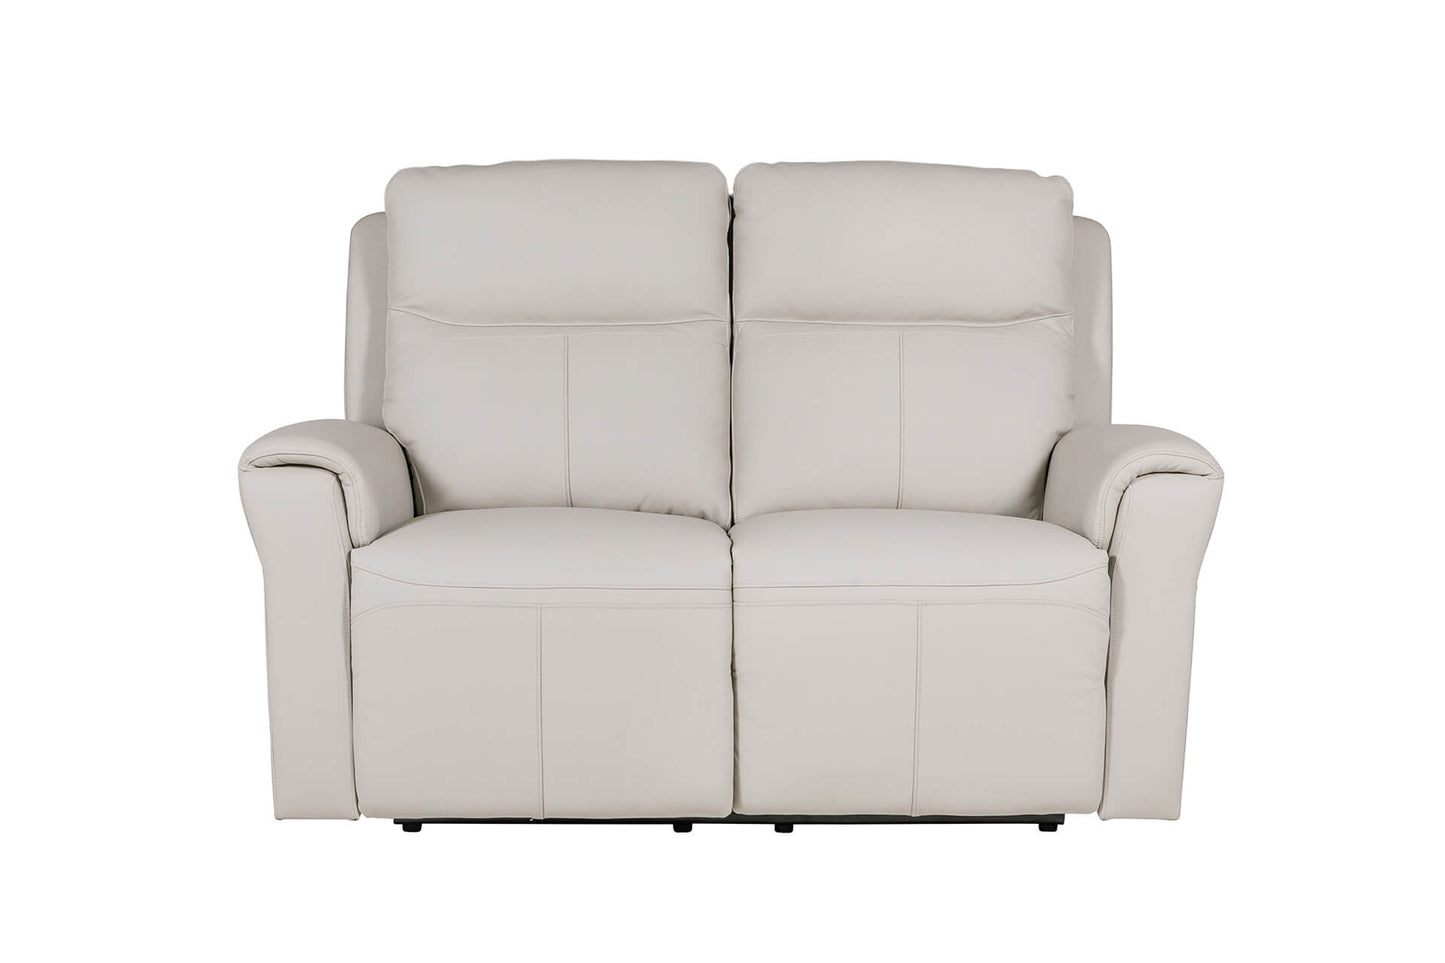 Russo - 2 Seater - Electric Recliner - Stone Leather